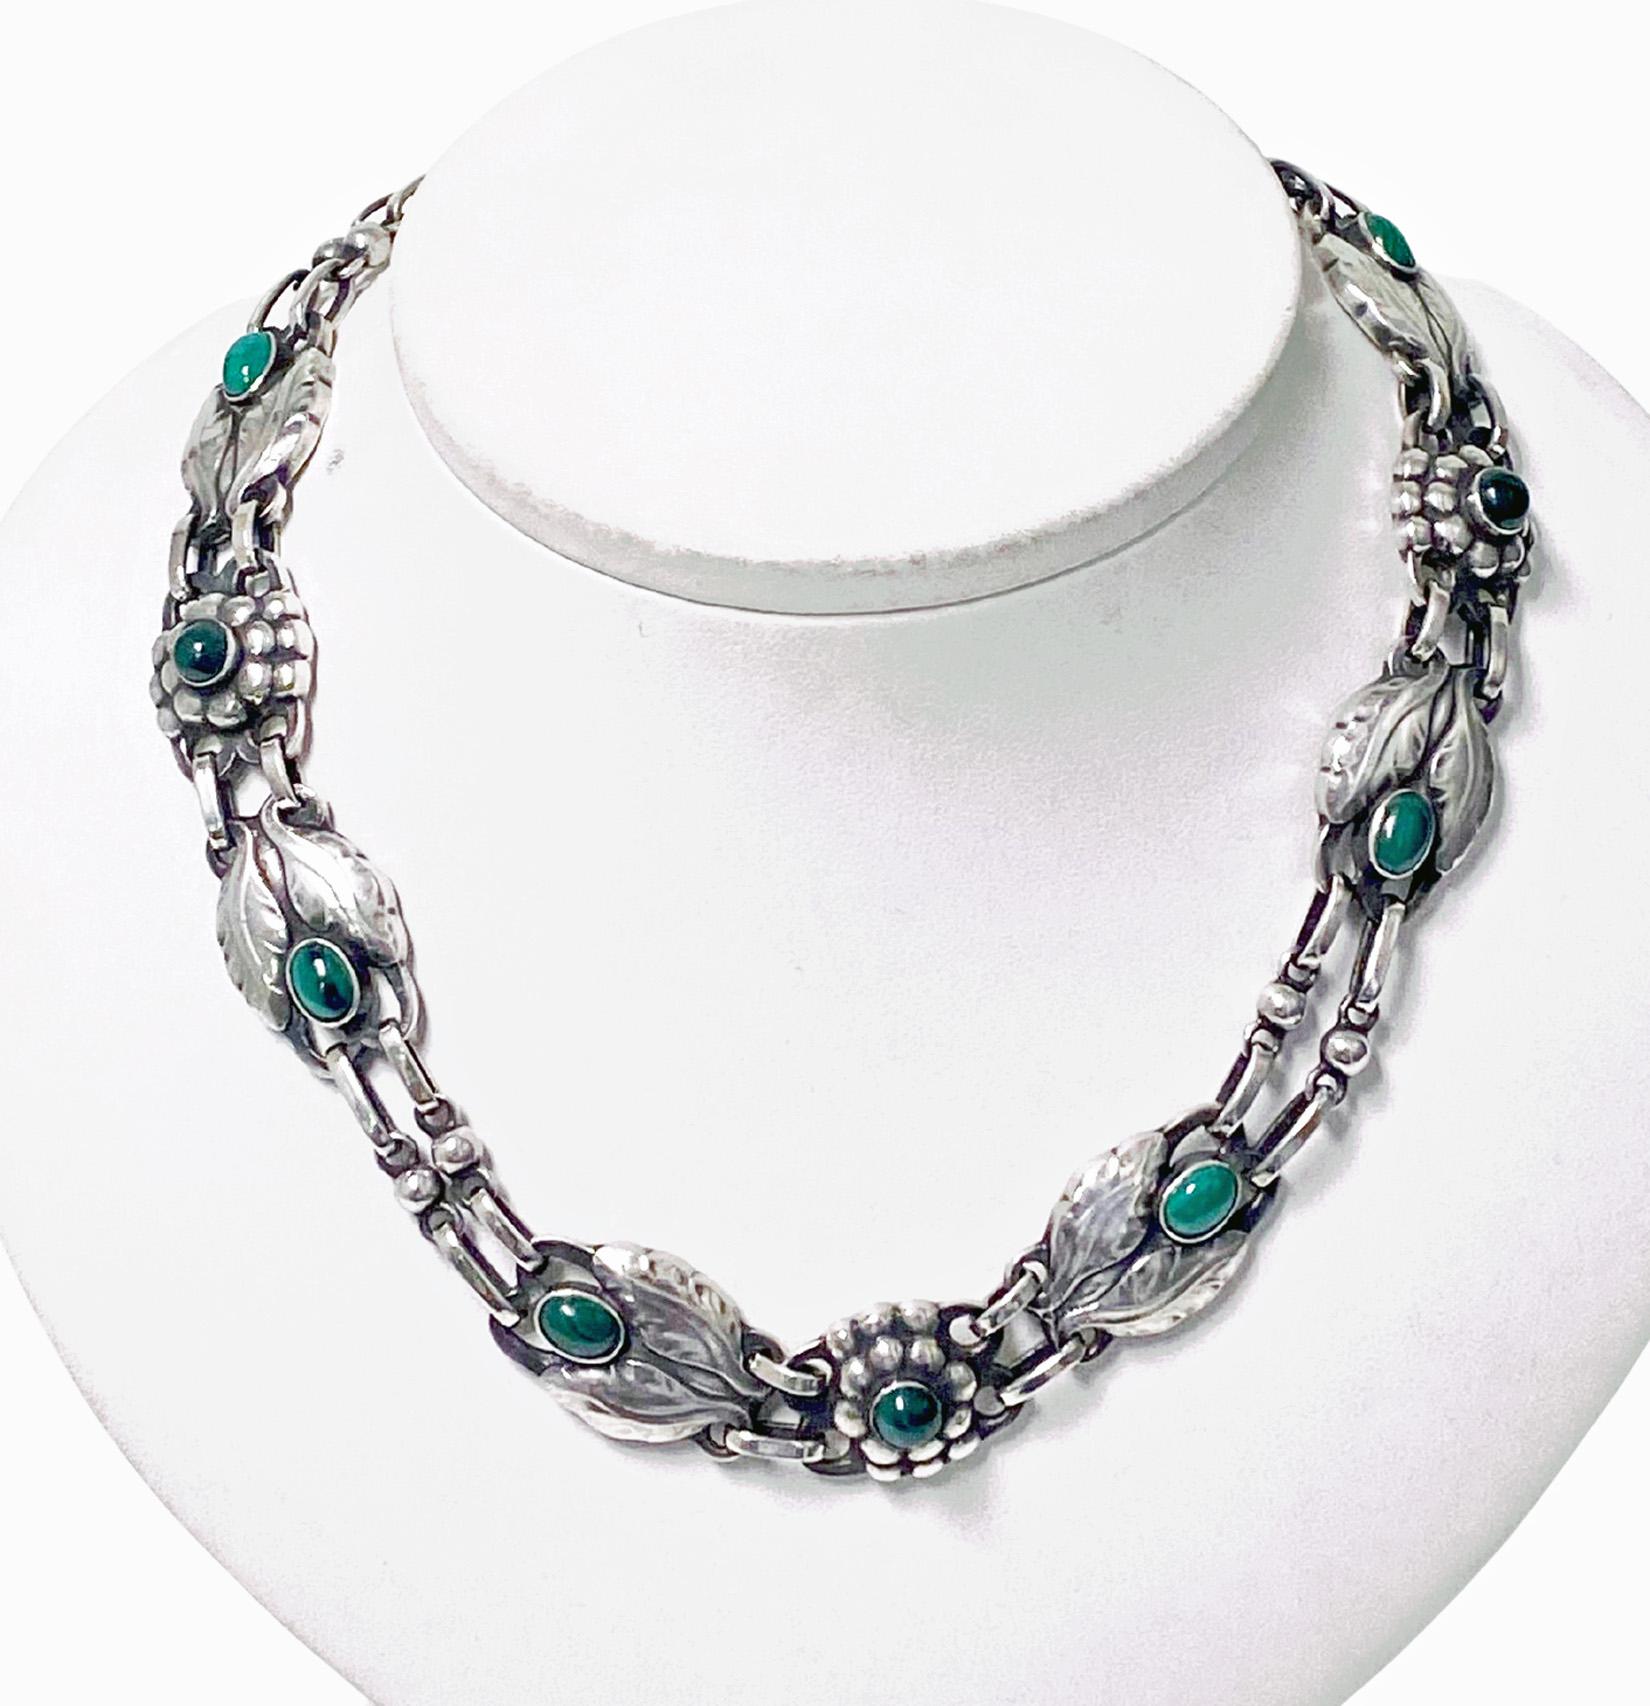 Georg Jensen Malachite and Sterling Silver Necklace No 1. Bezel set oval and round malachite with stylised bud leaves and berries interval links. Full Jensen marks to reverse. Length 14.75 inches. Item Weight: 55 grams. Reference similar example P